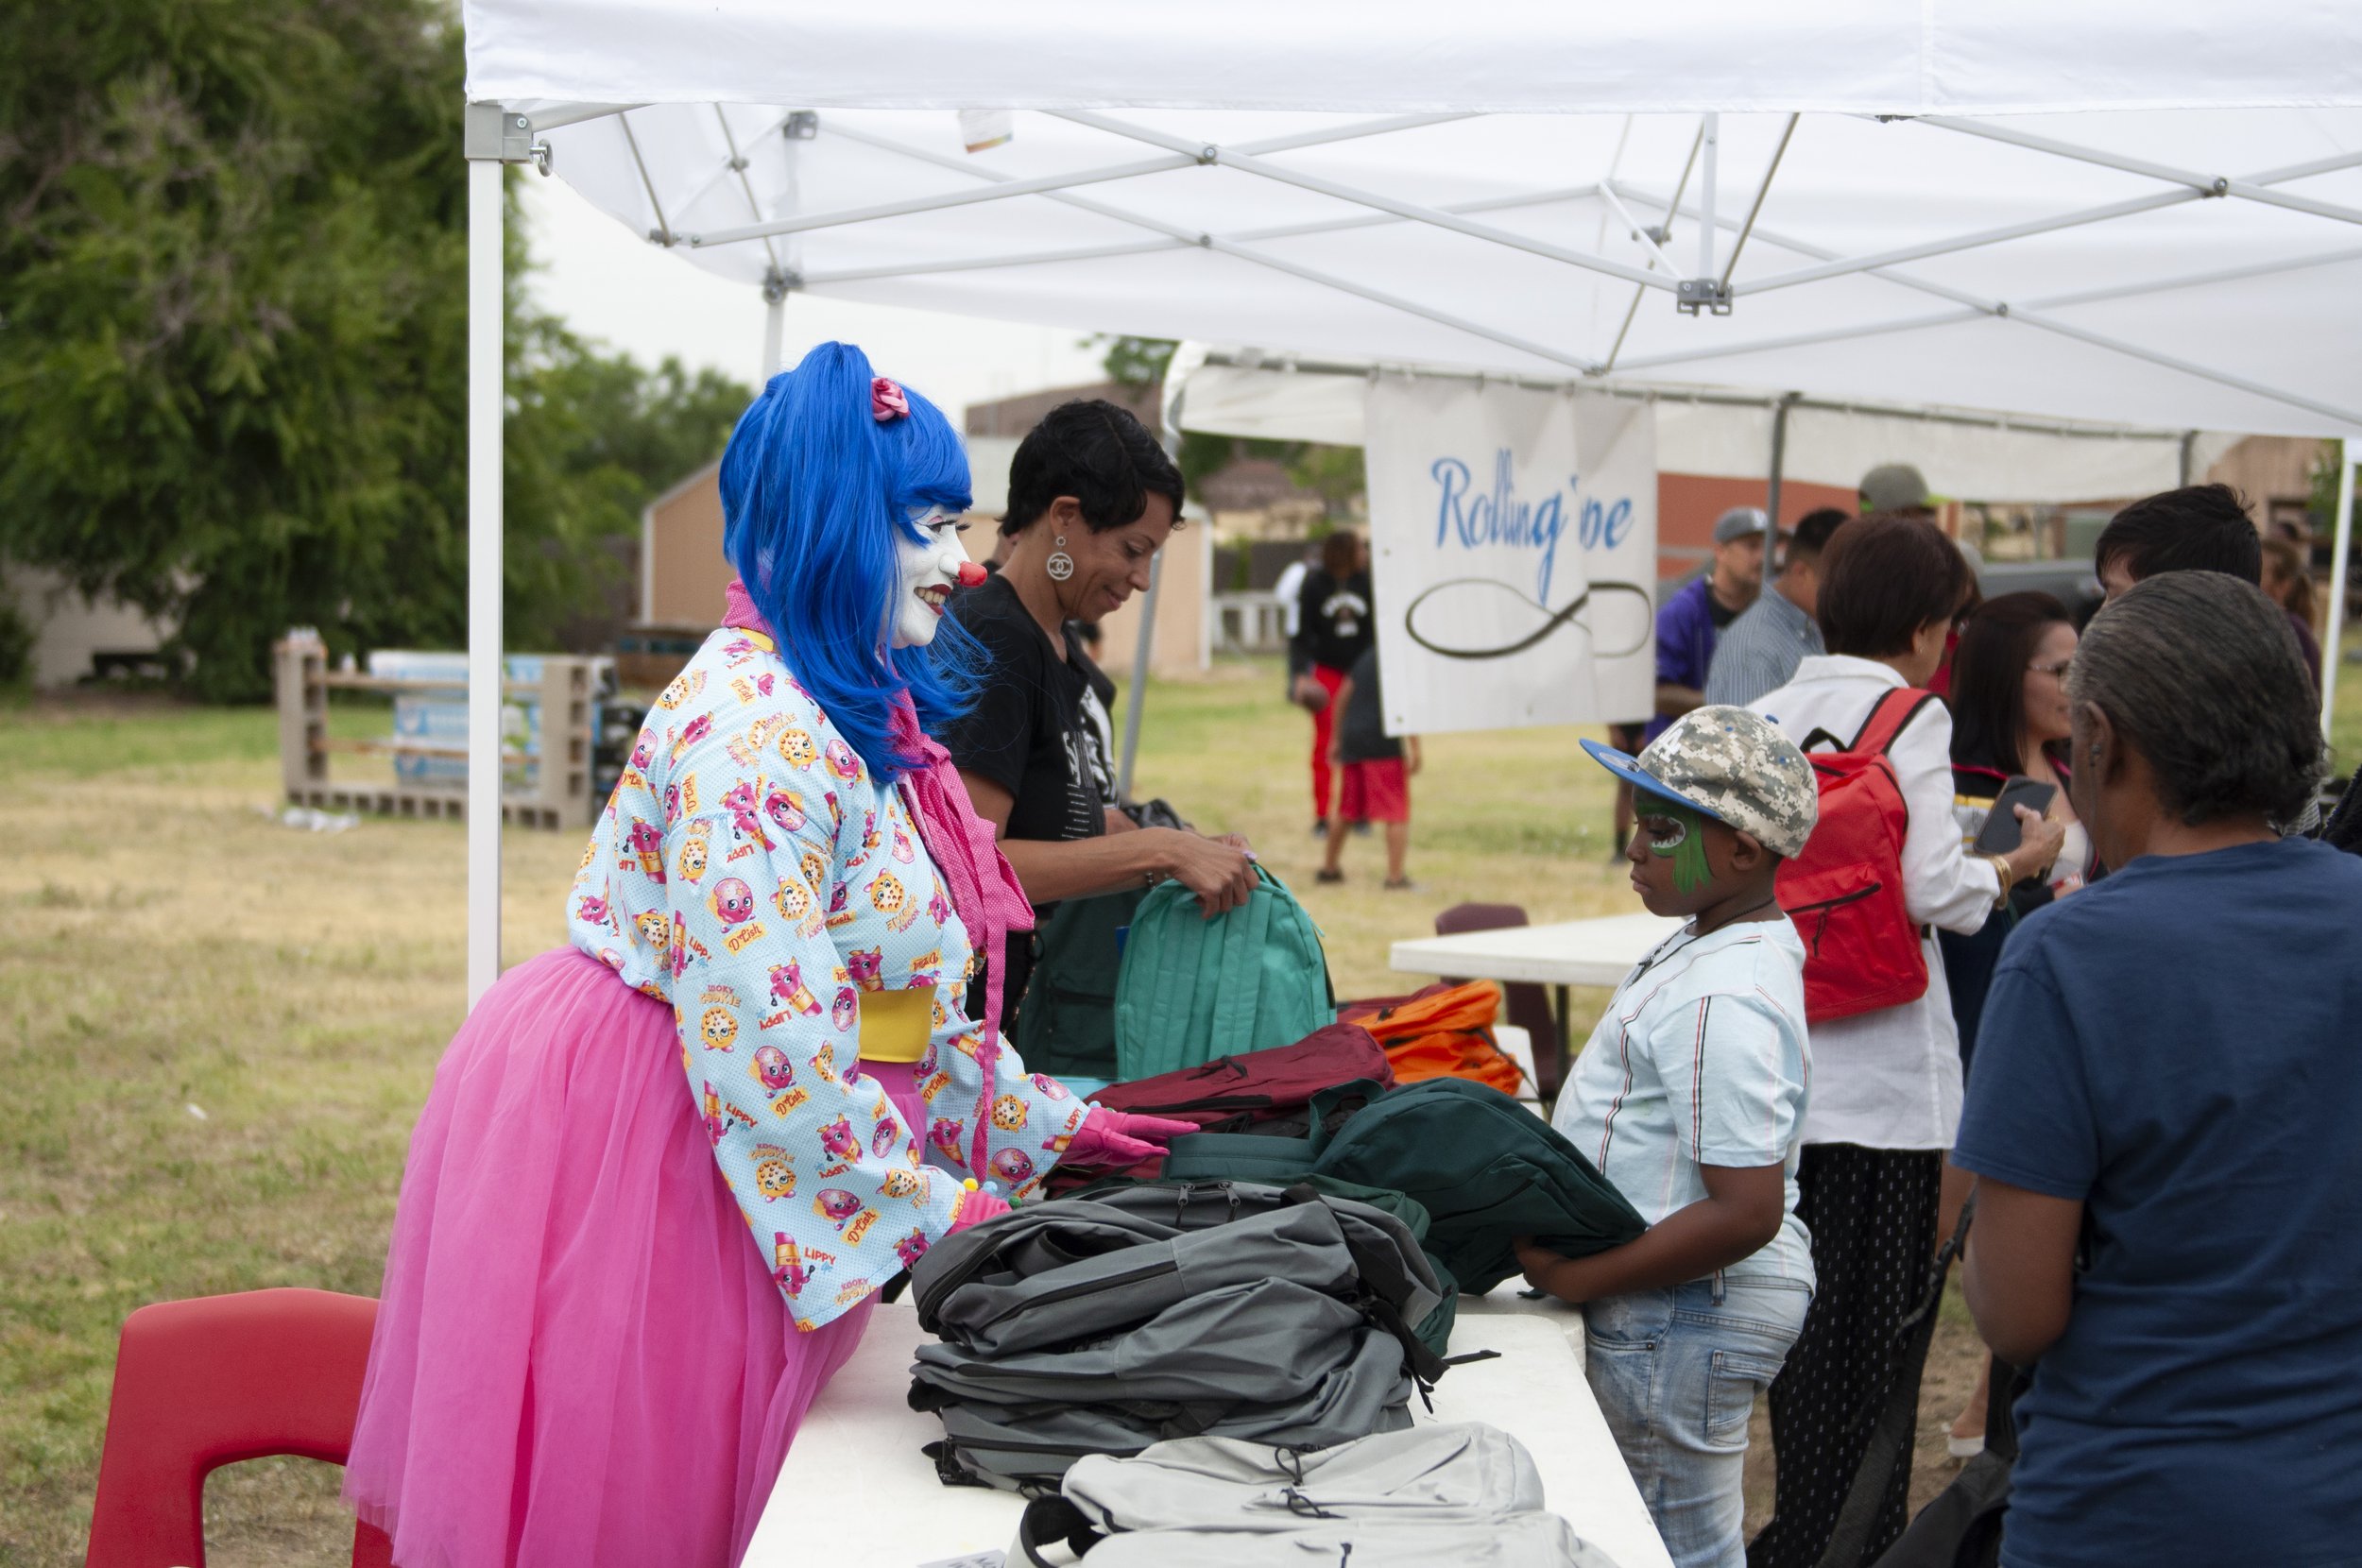  BlahAwesome hands out backpacks while greeting attendees. Photo: Adrian Michael 